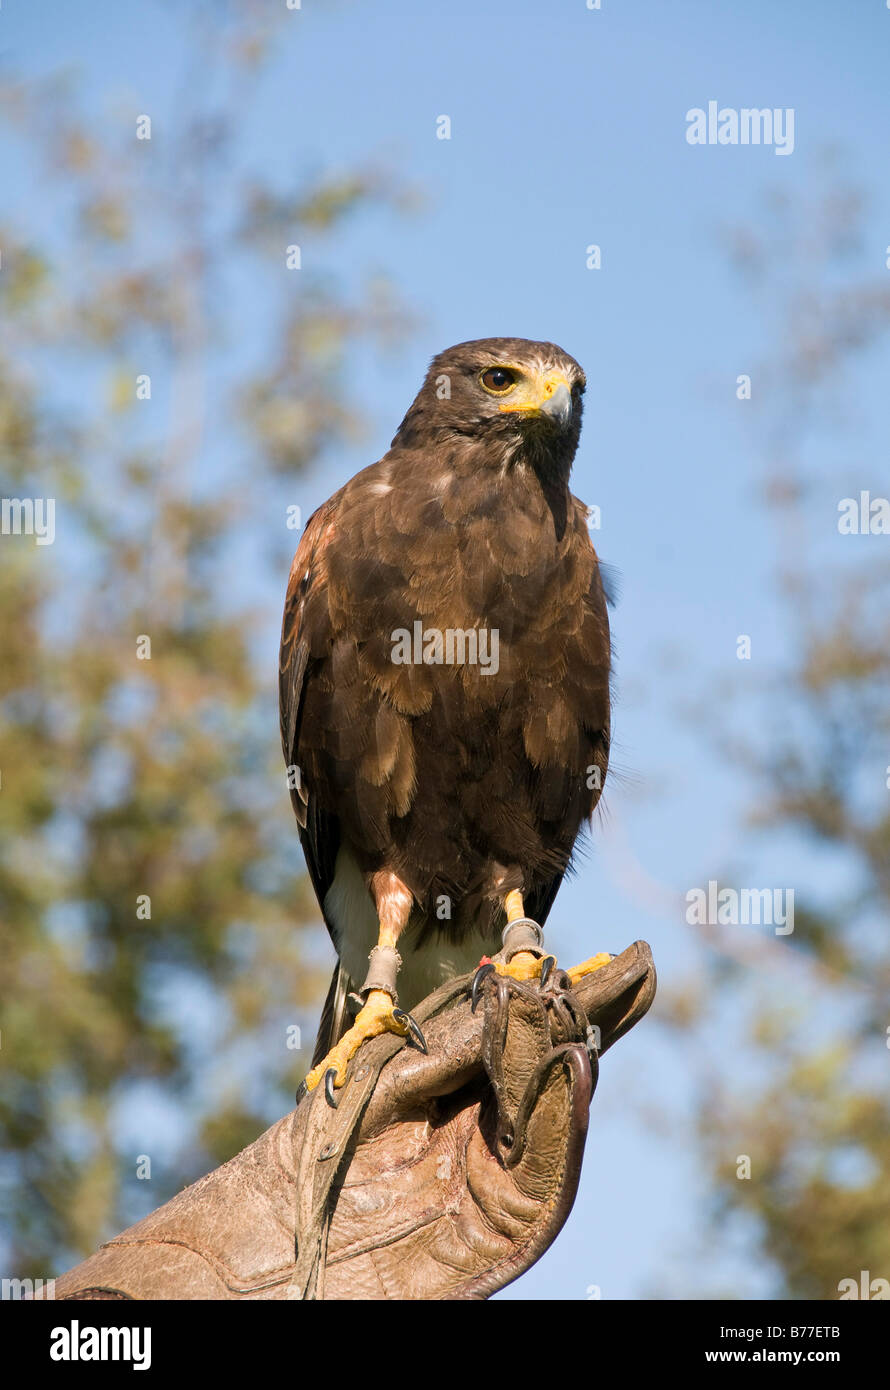 Buzzard (Buteo) perched on a falconers hand, Westkuestenpark, St. Peter-Ording, Schleswig-Holstein, Germany, Europe Stock Photo